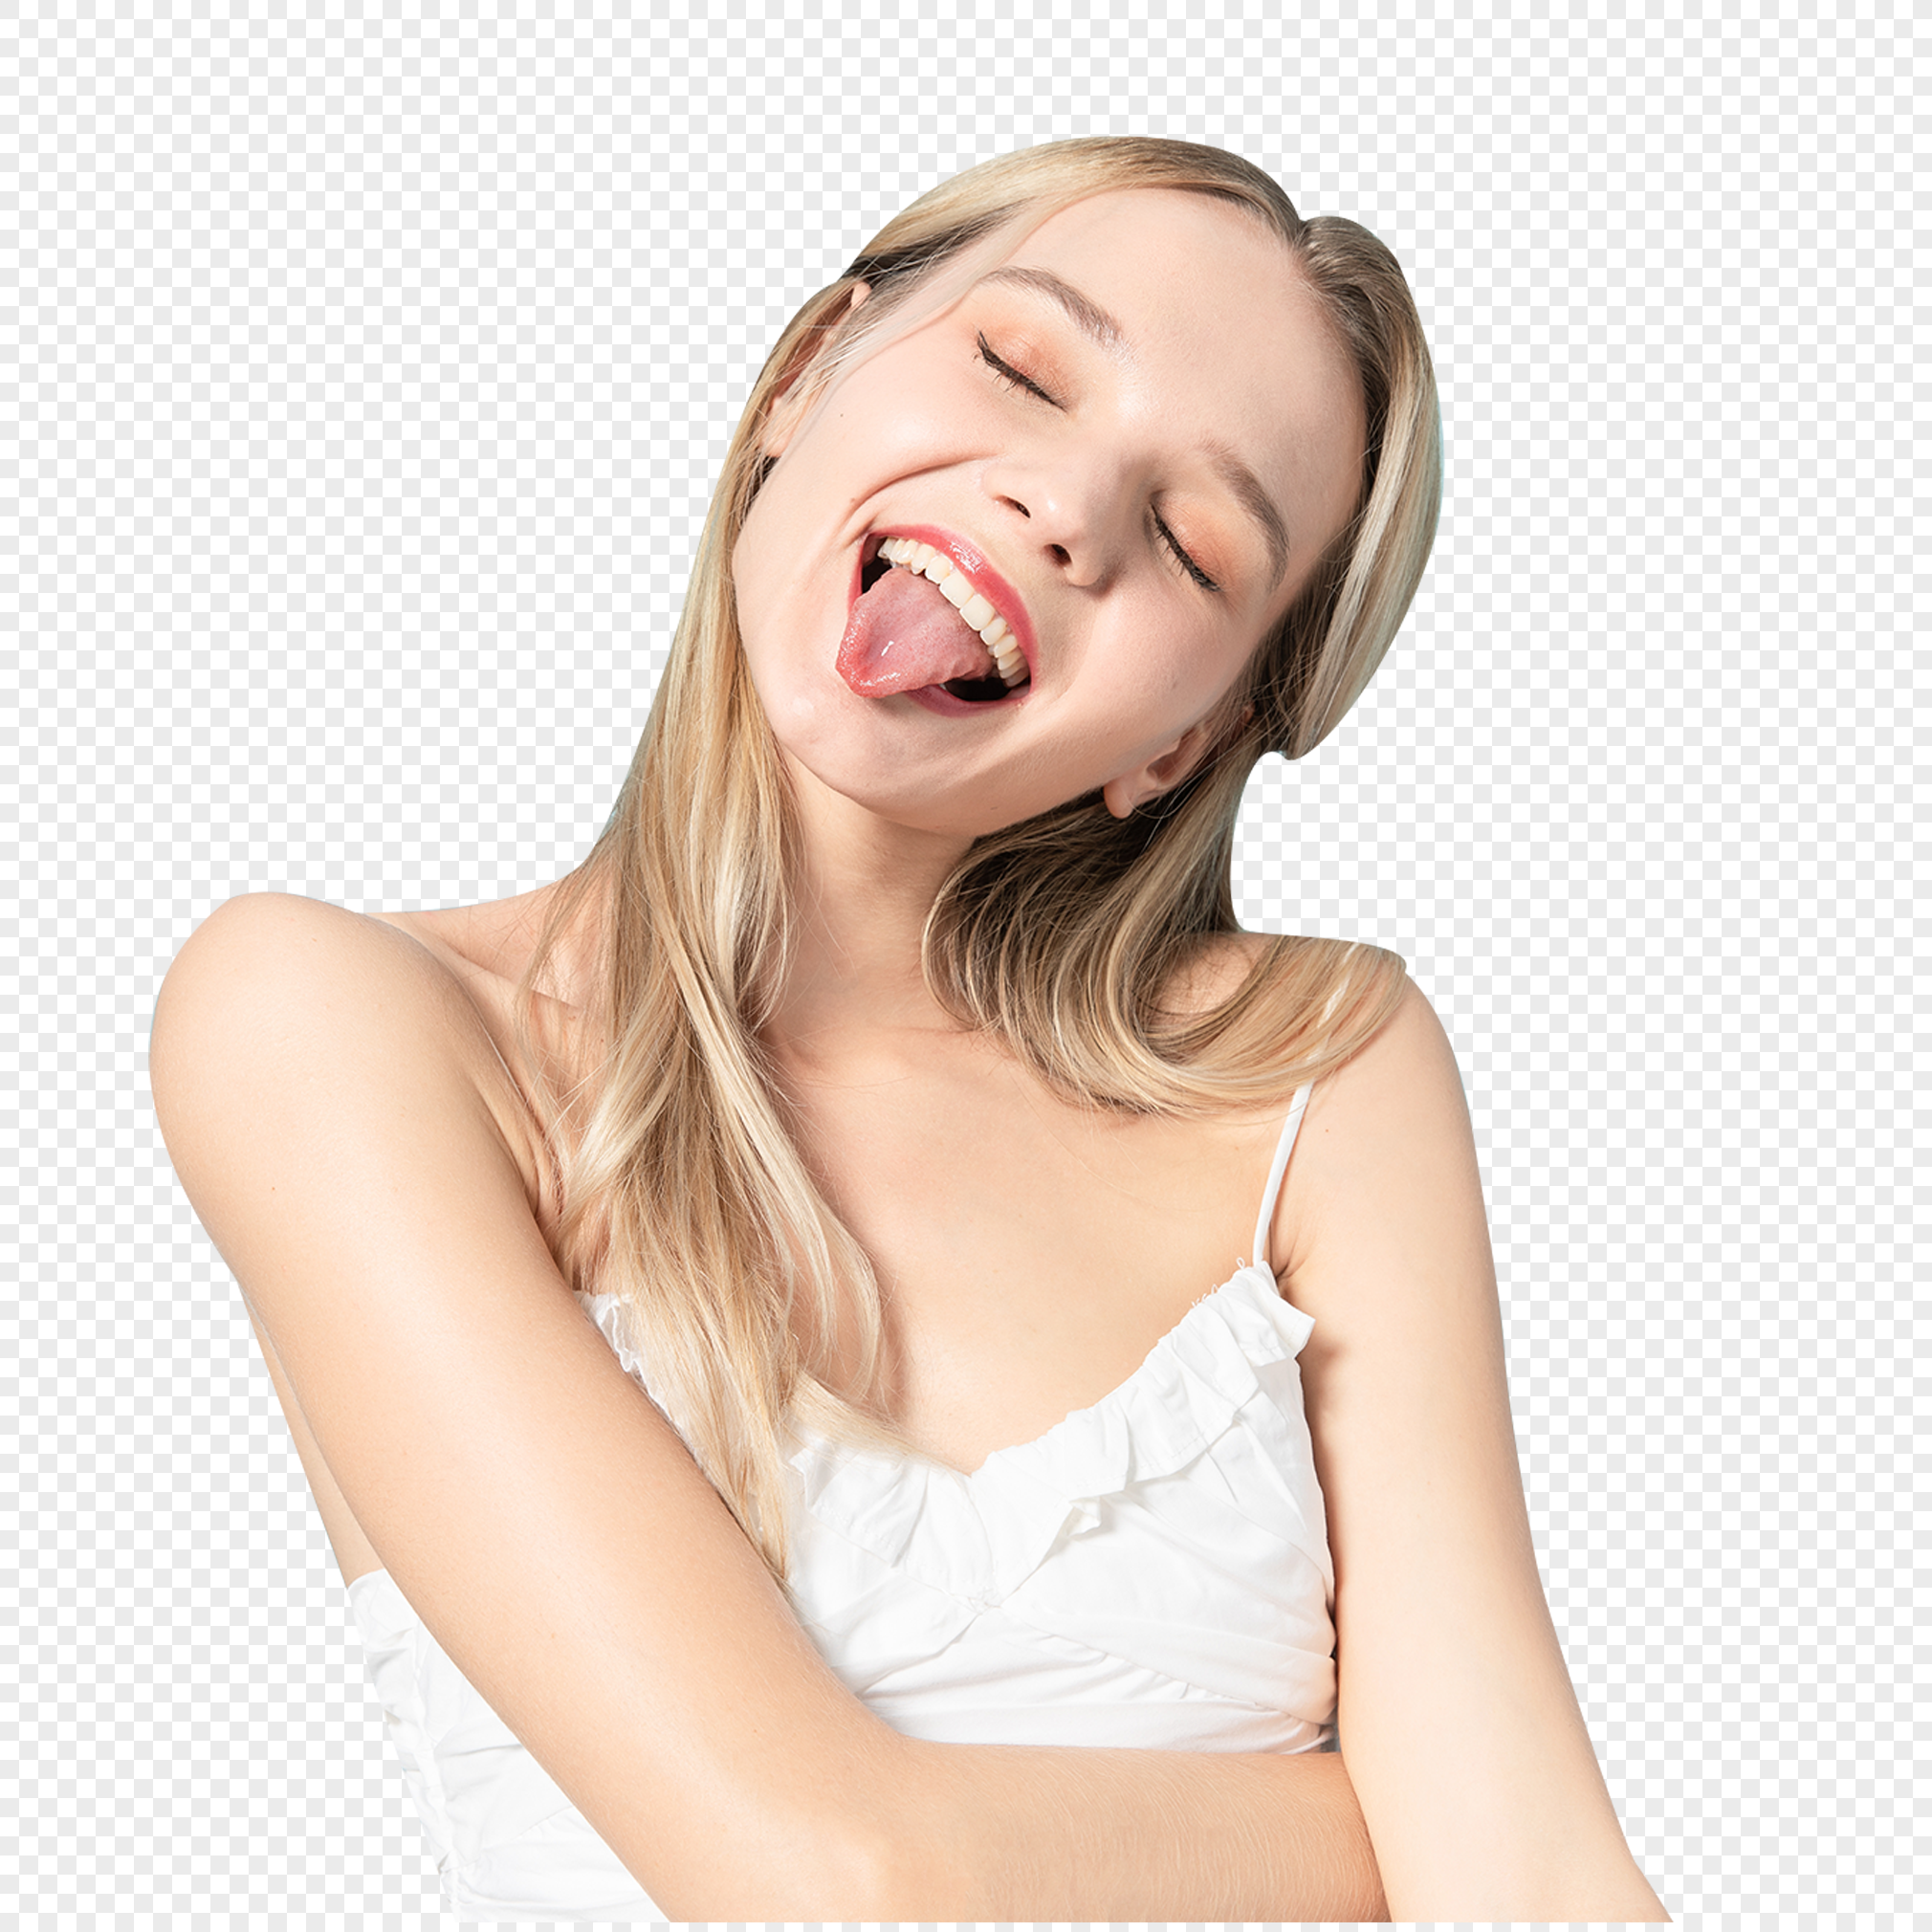 deepak kalia recommends girl sticking out tongue meme pic